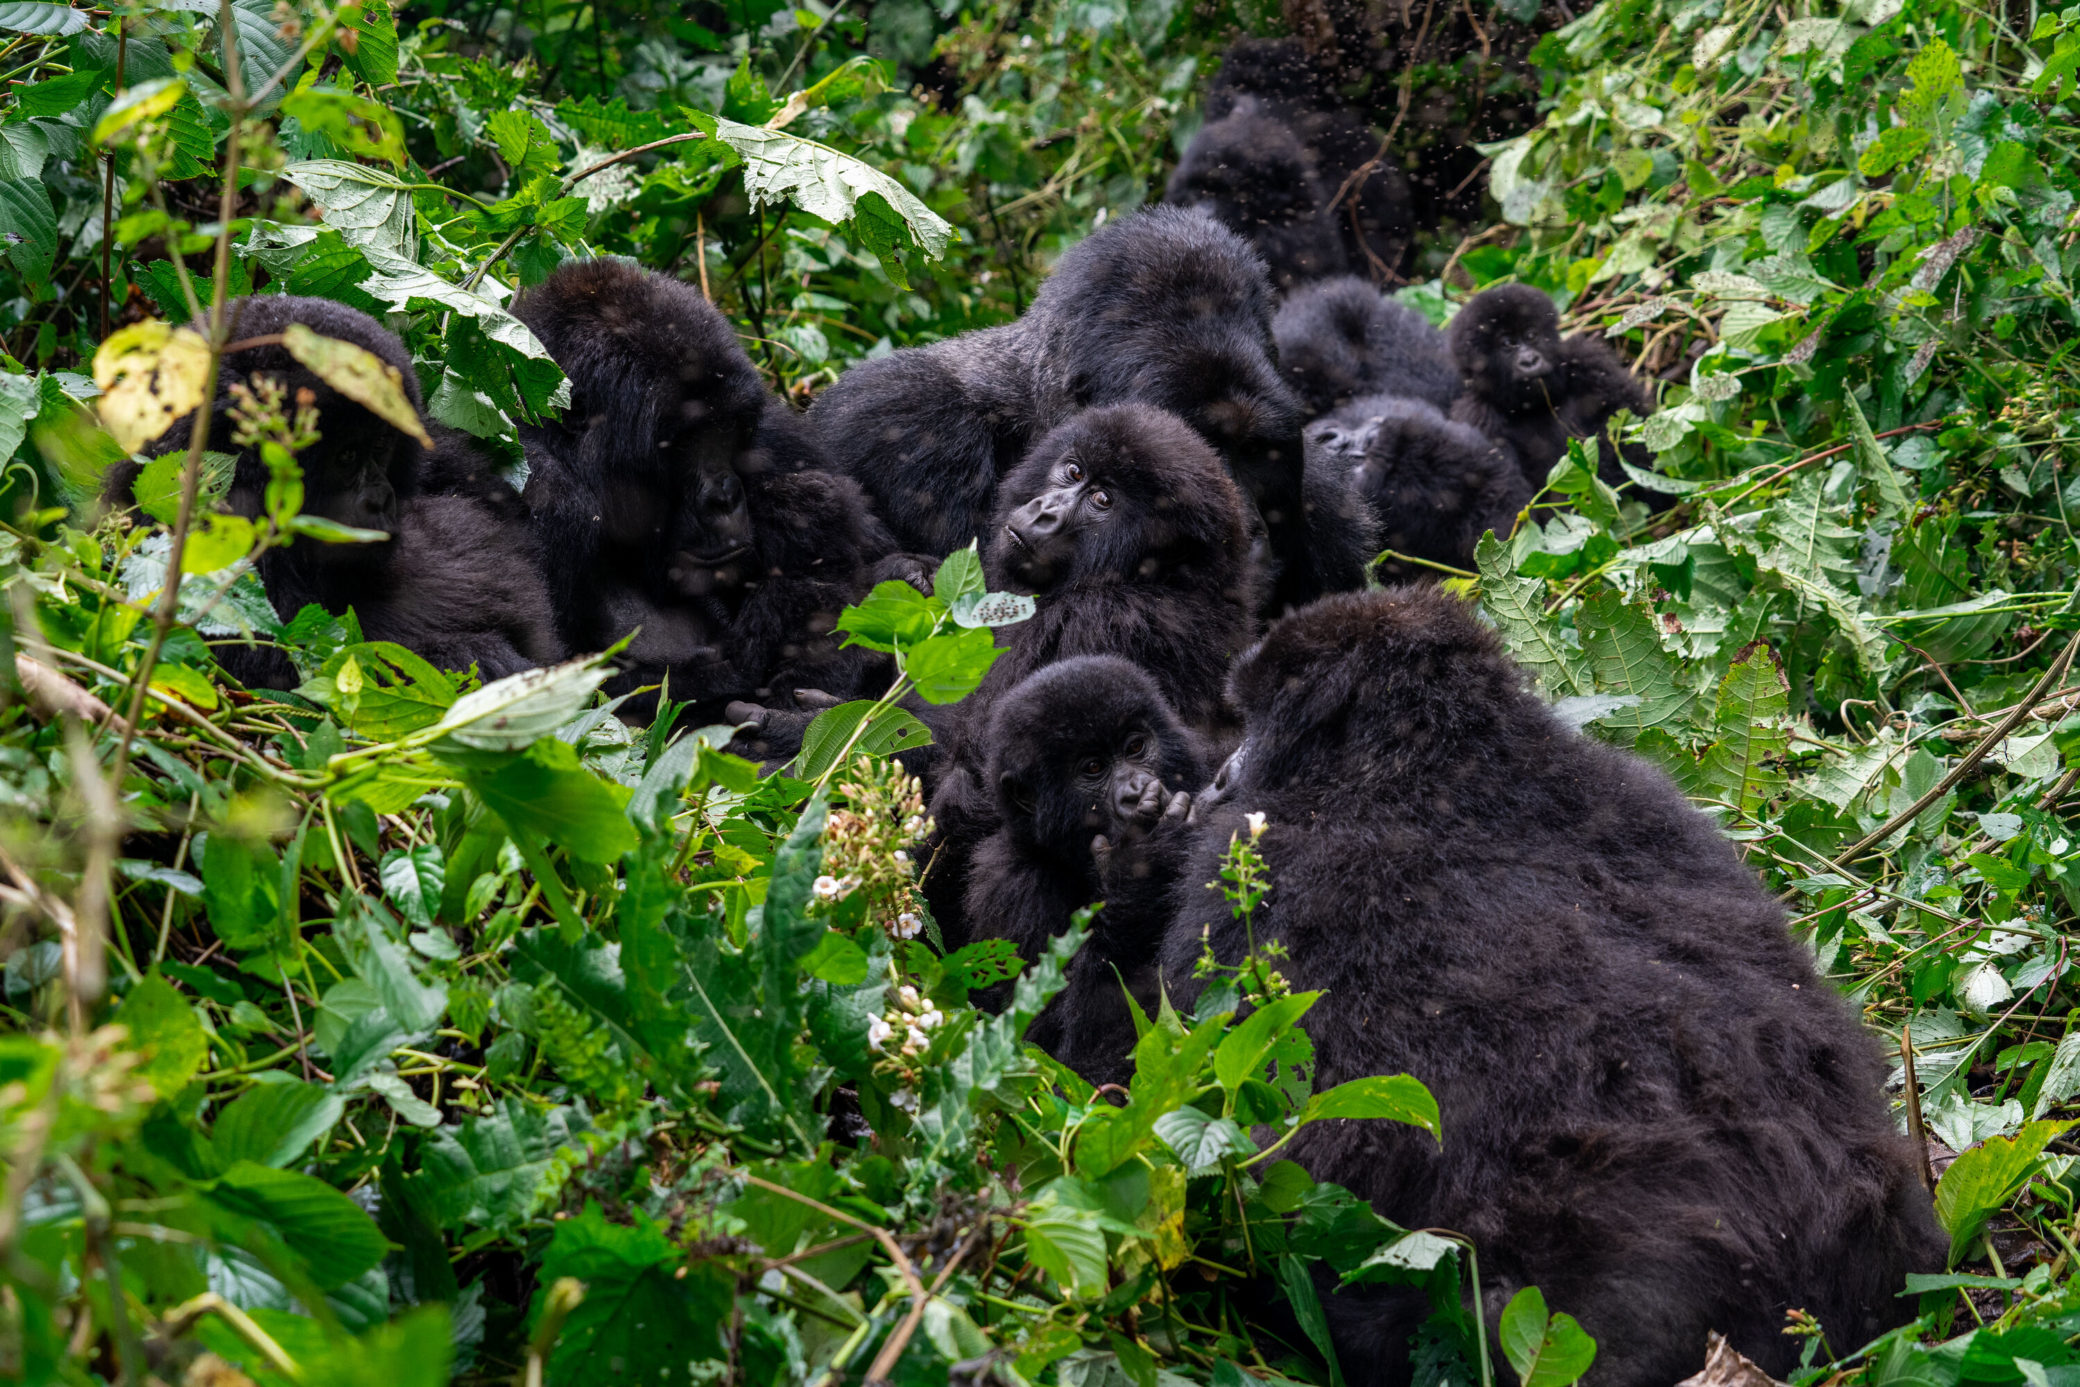 An image of a family of mountain gorillas in the rainforest